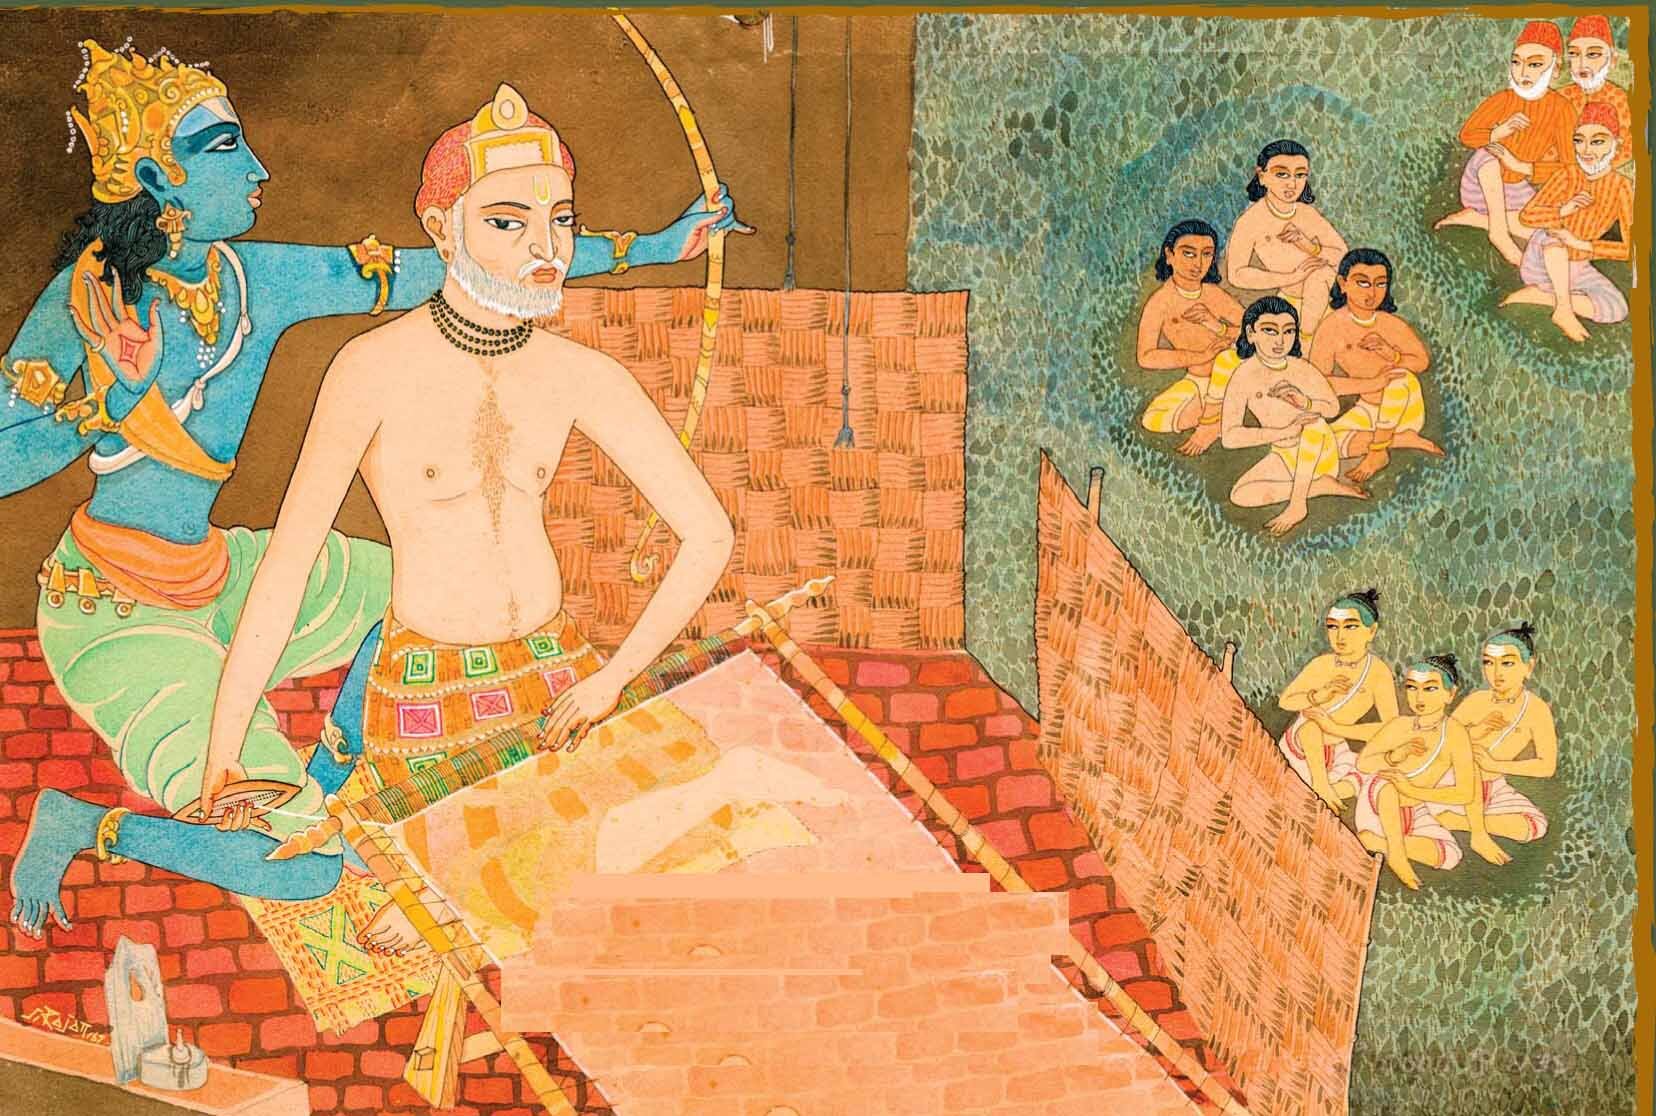 An illustration depicting his syncretism with poetry that reached far and wide and his followers belonged to several communities across the Indian subcontinent.